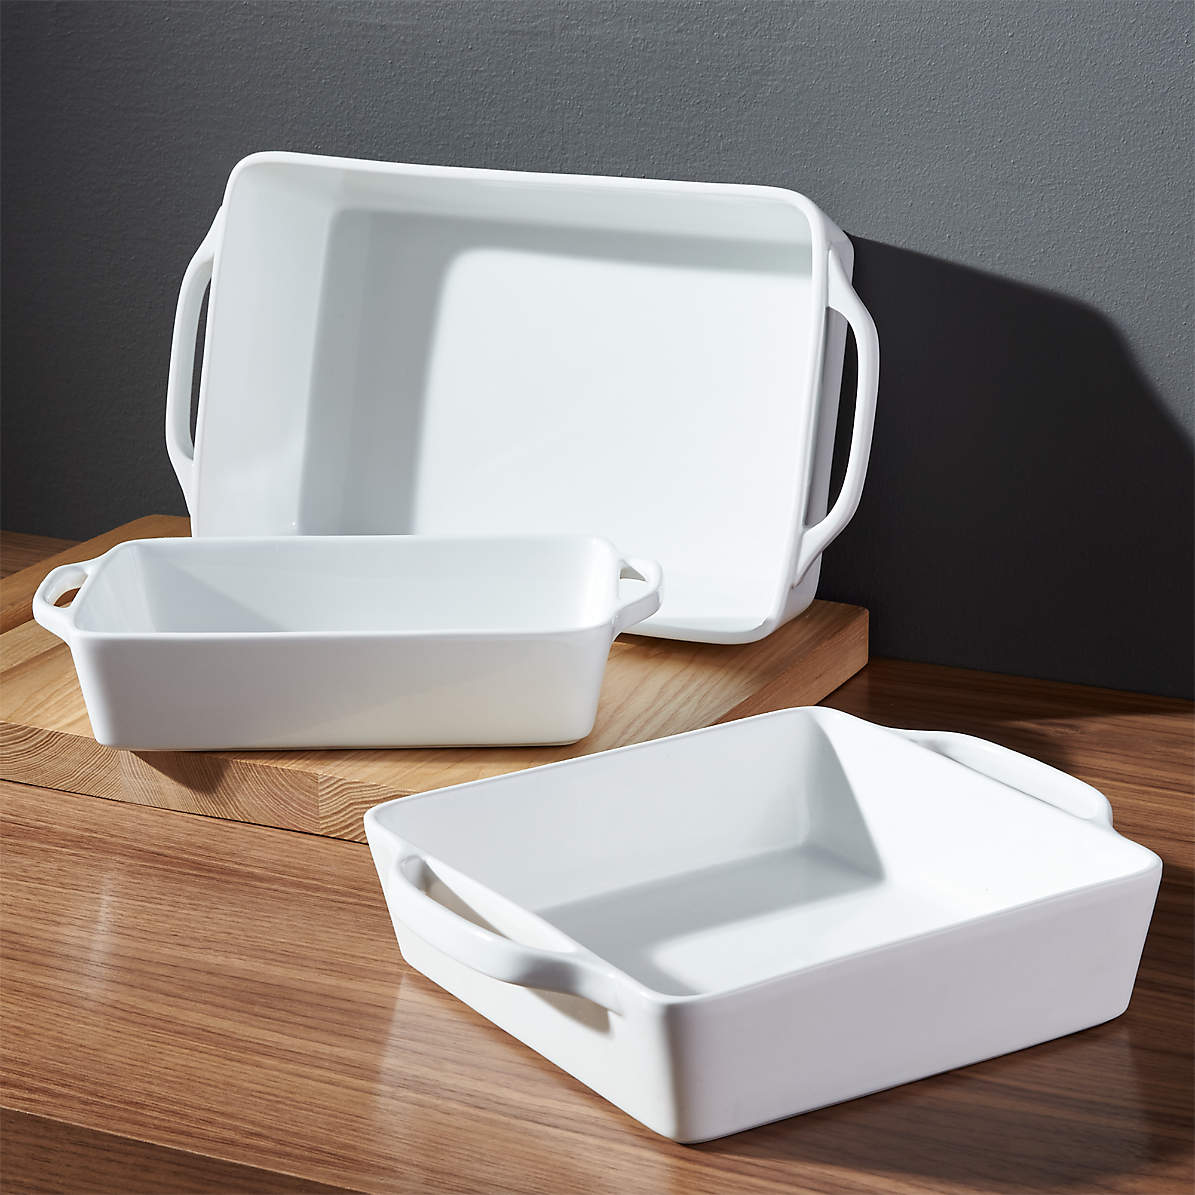 Crate and Barrel, Potluck Baking Dishes, Set of Three - Zola